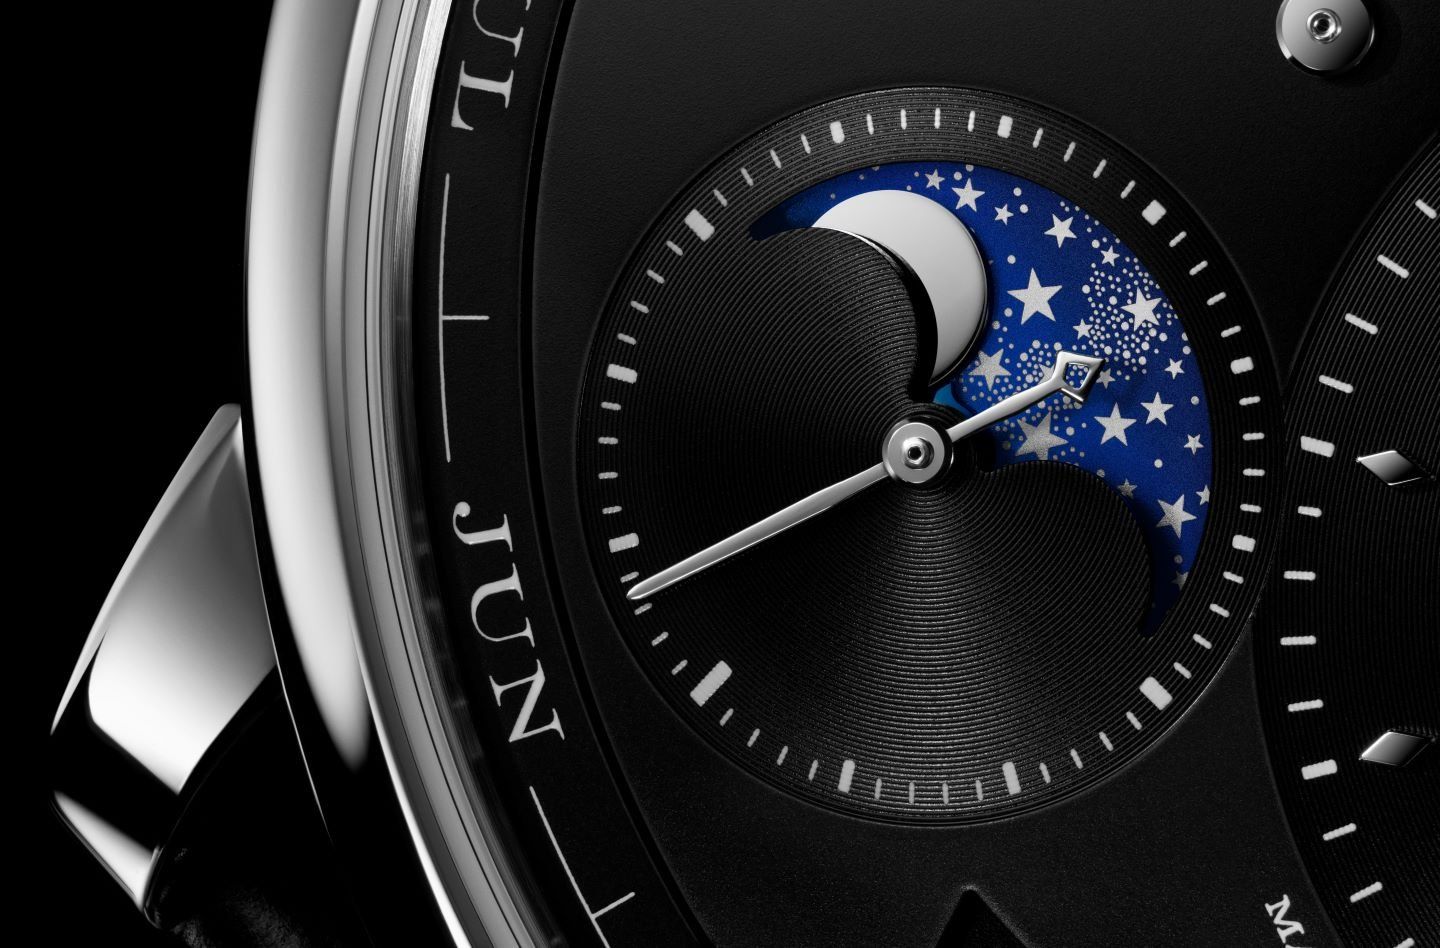 A moonphase complication